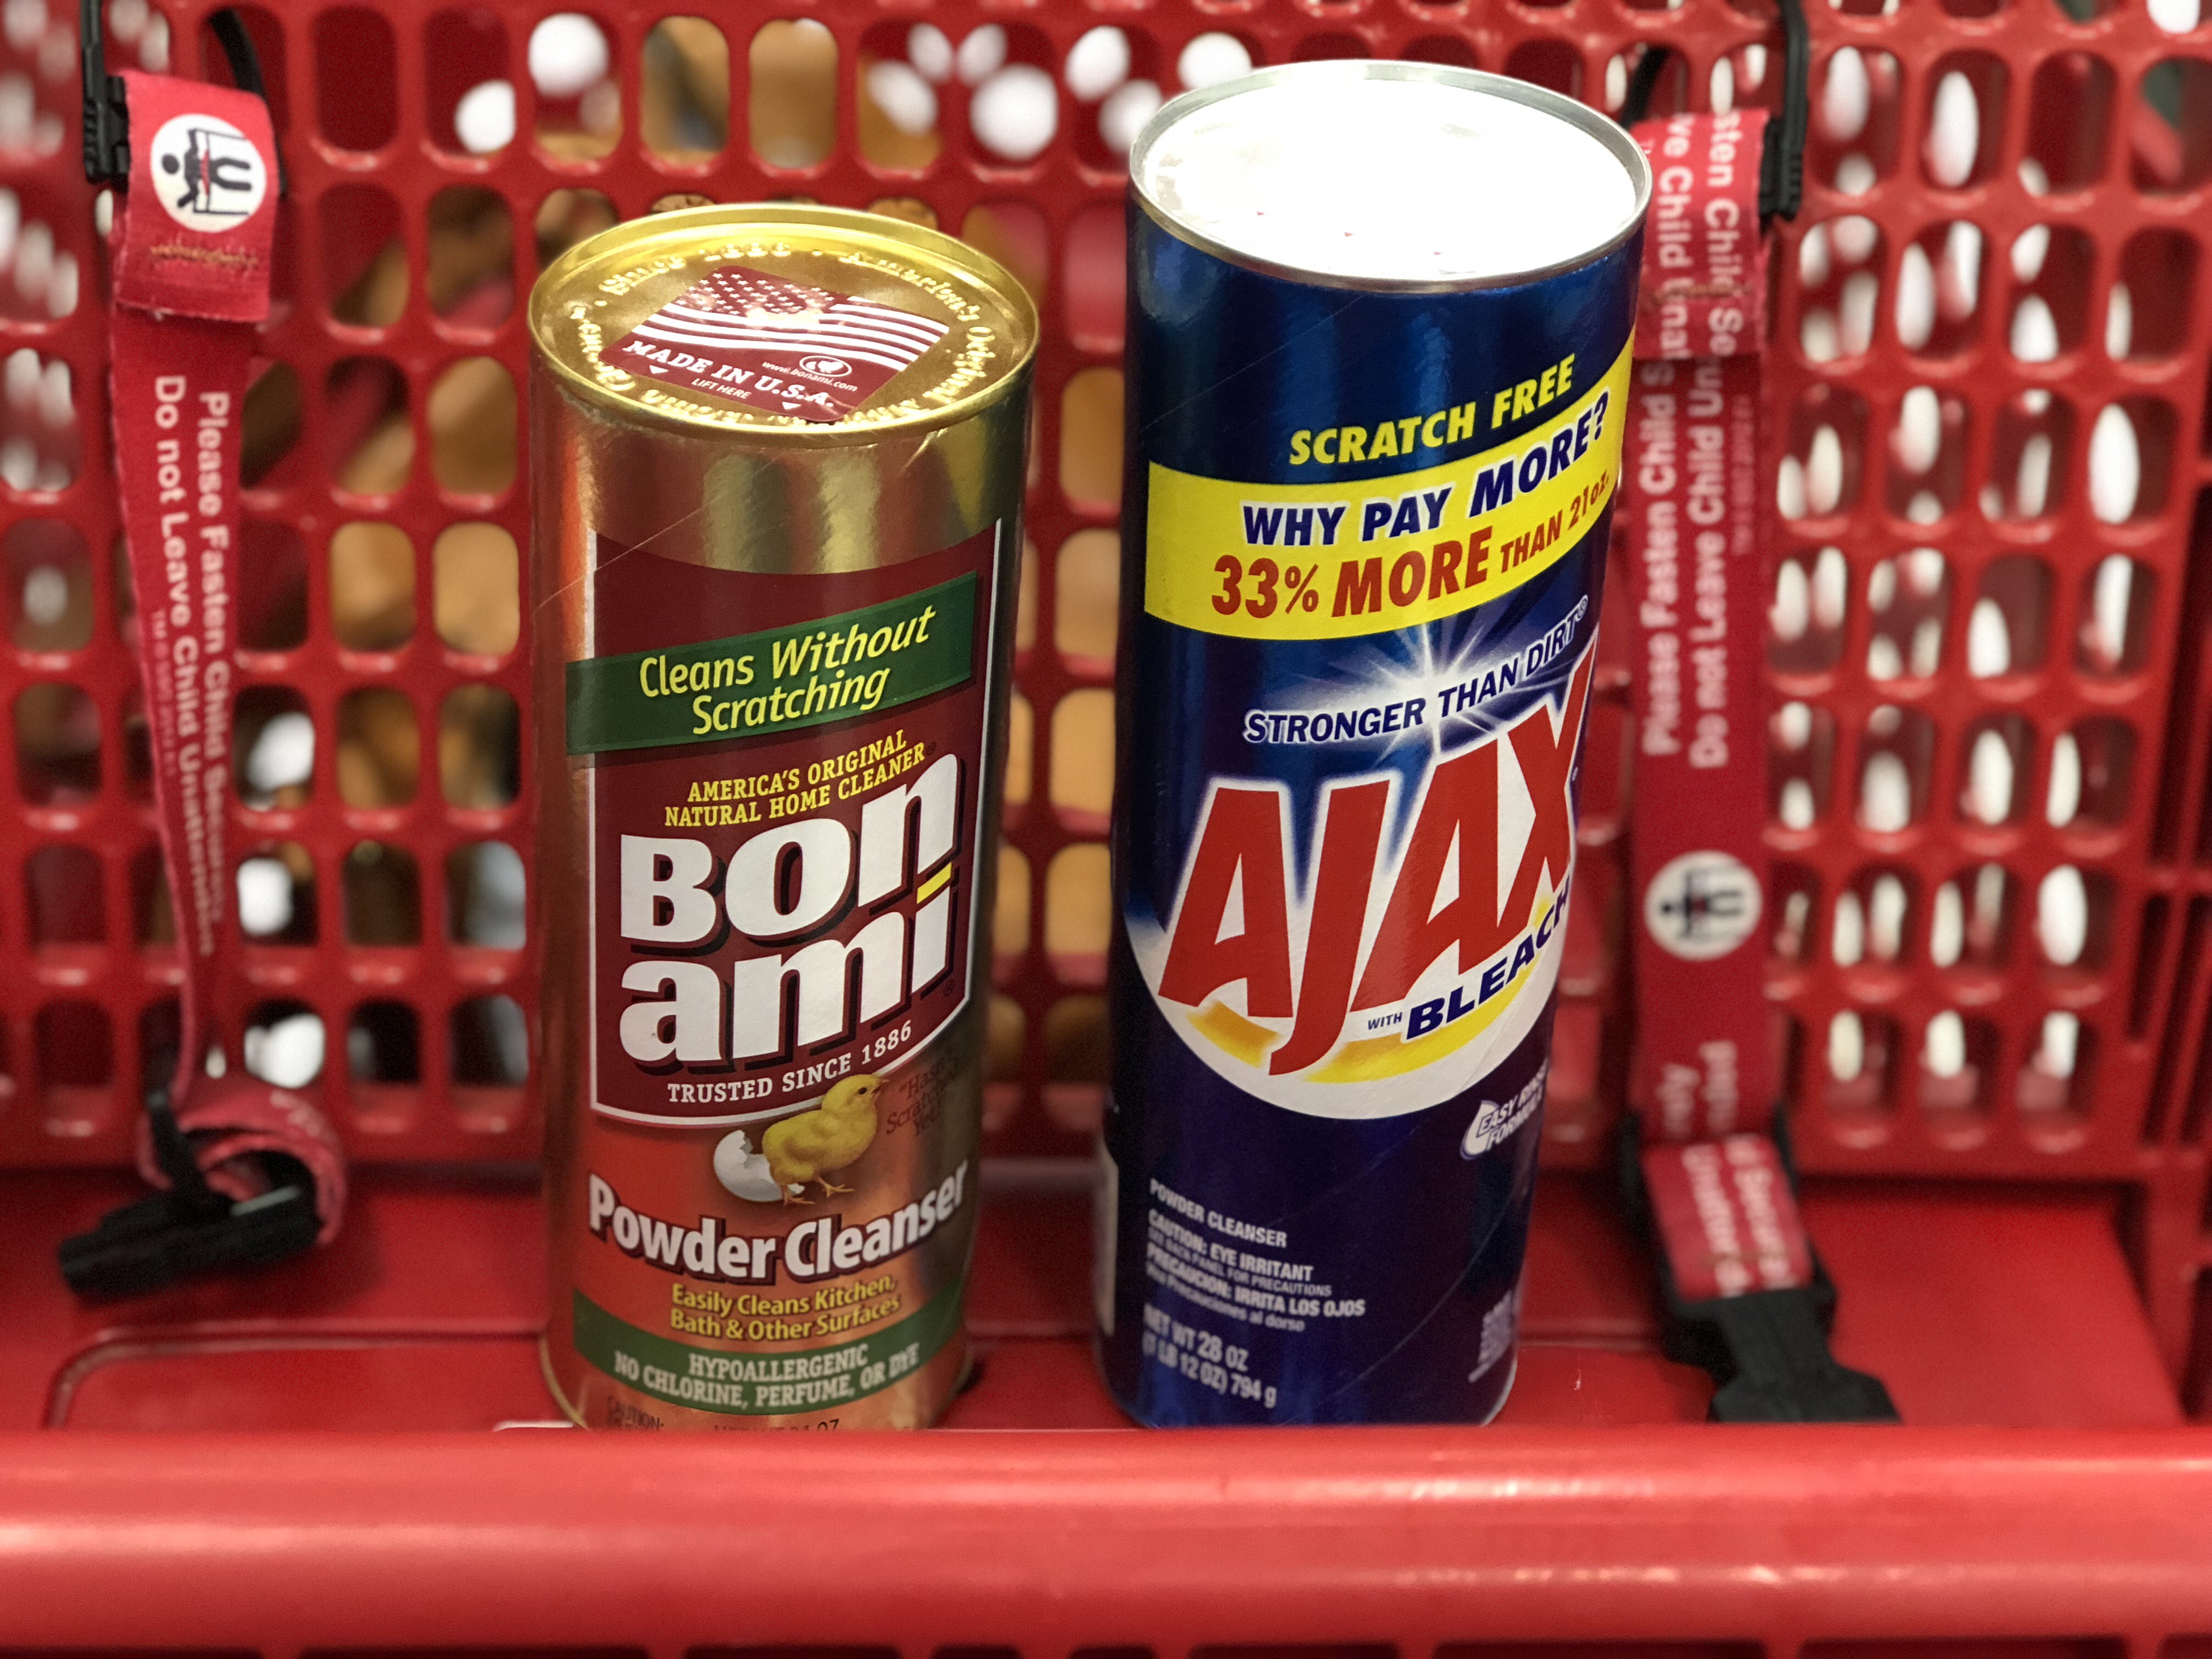 green natural eco-friendly cleaning products – scouring powders at Target – Bon Ami versus Ajax